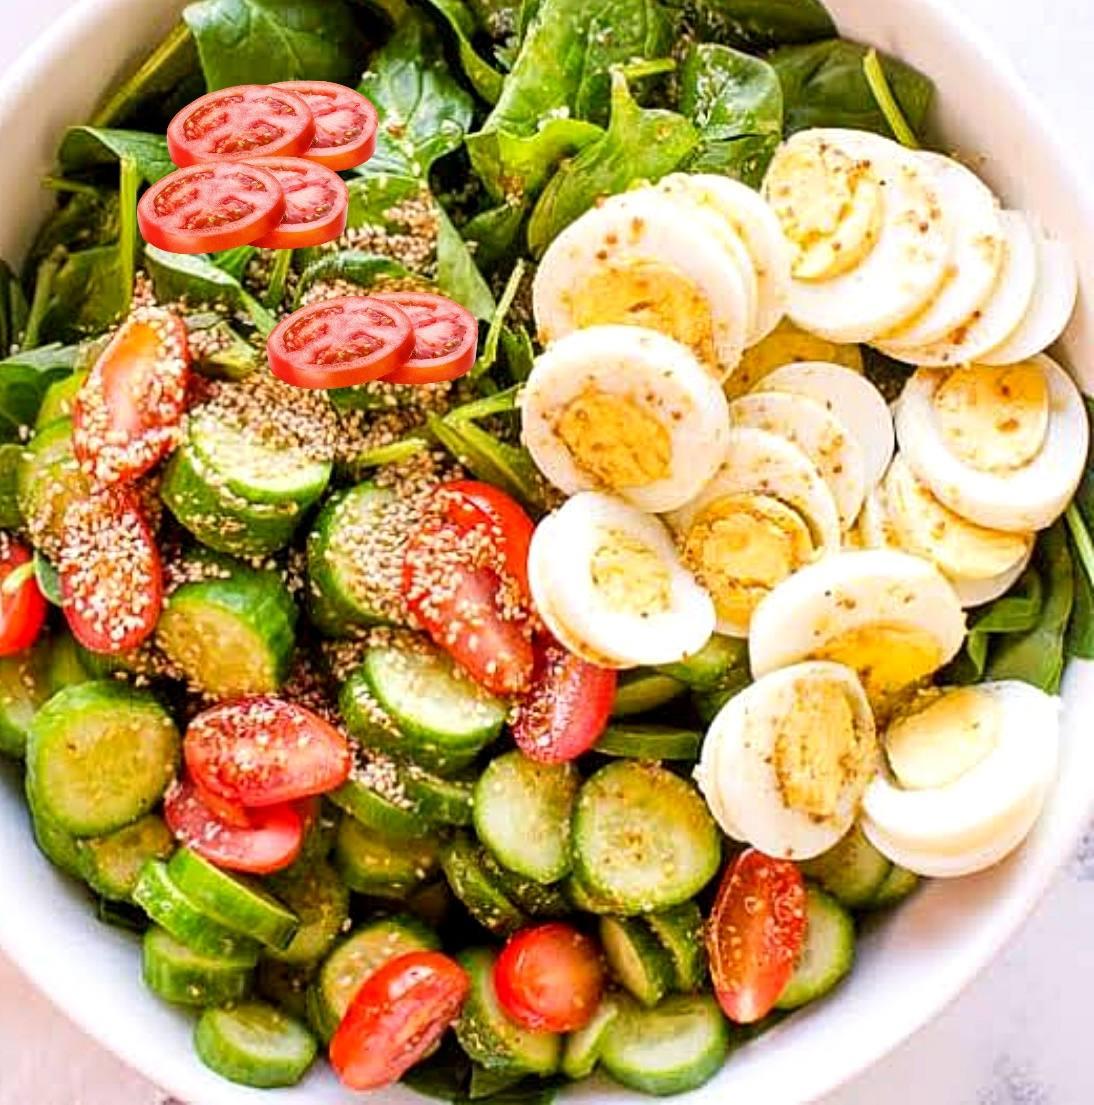 Spinach Salad is What To Eat For Lunch At Home